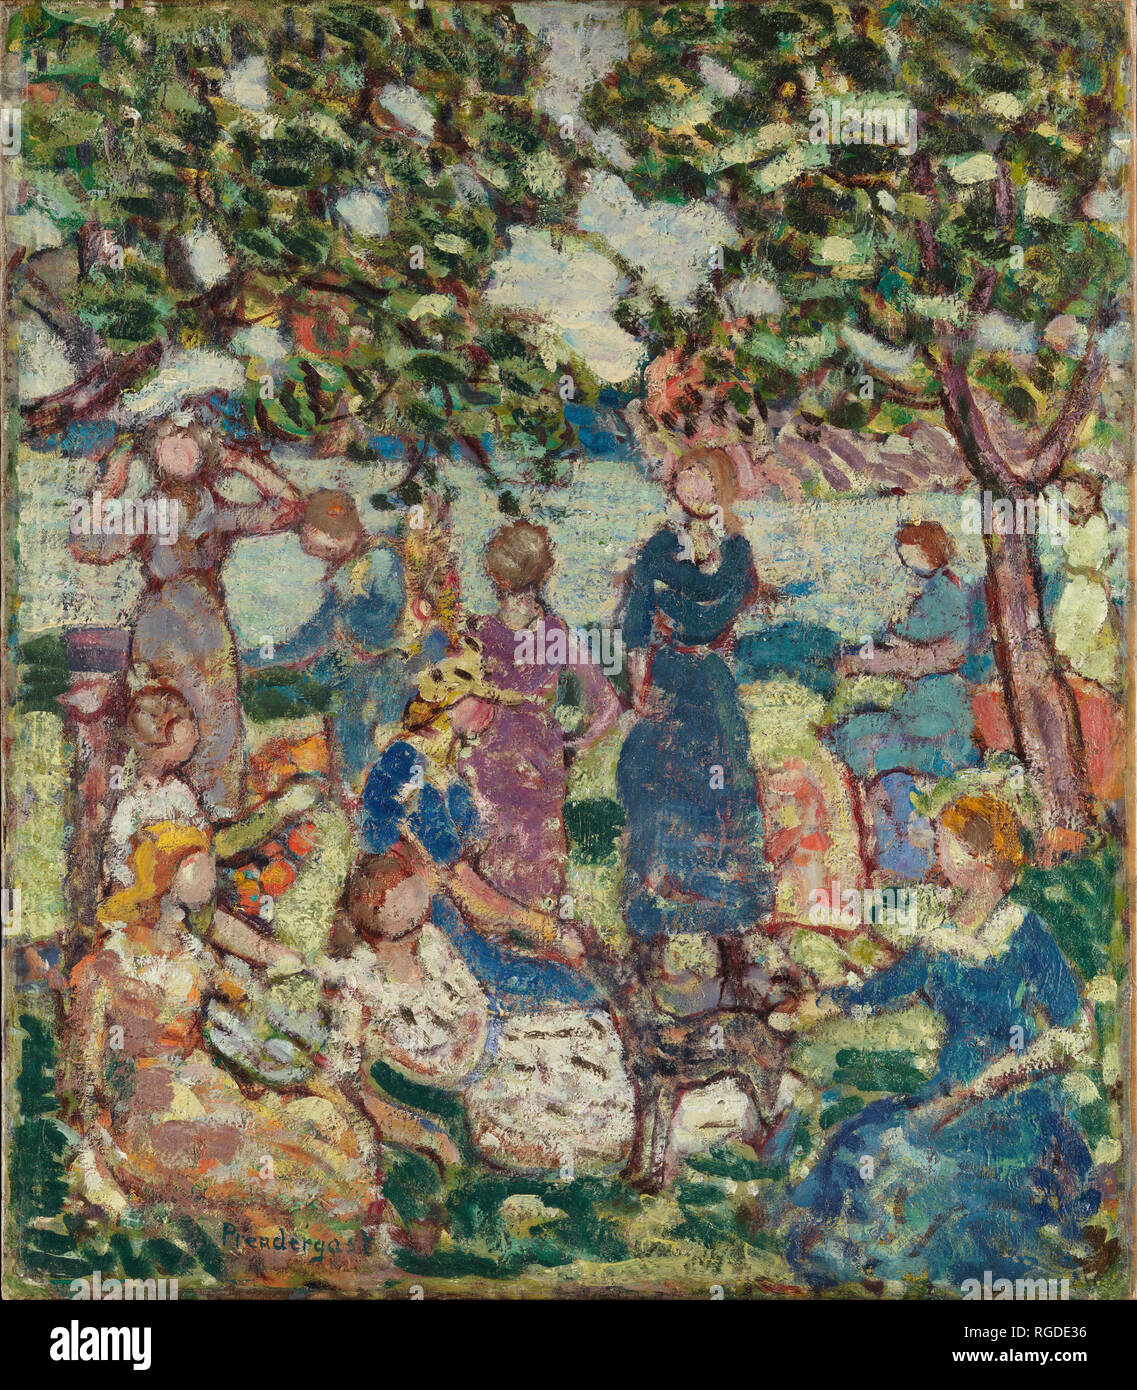 Picnic by the Inlet. Artist: Maurice Brazil Prendergast  (American, St. John's, Newfoundland 1858-1924 New York). Dimensions: 28 1/4 x 24 3/4 in. (71.8 x 62.9 cm)  Framed: 37 7/8 x 34 3/8 x 4 1/2 in. (96.2 x 87.3 x 11.4 cm). Date: ca. 1918-23.  Having theretofore worked mostly in watercolor and monotype, Prendergast made a serious commitment to oil painting beginning in about 1903. By 1910 his oils had become more varied and imaginative in subject and more monumental in arrangement, as this canvas attests. The subject originated in the seaside culture of New England, where Prendergast spent ma Stock Photo